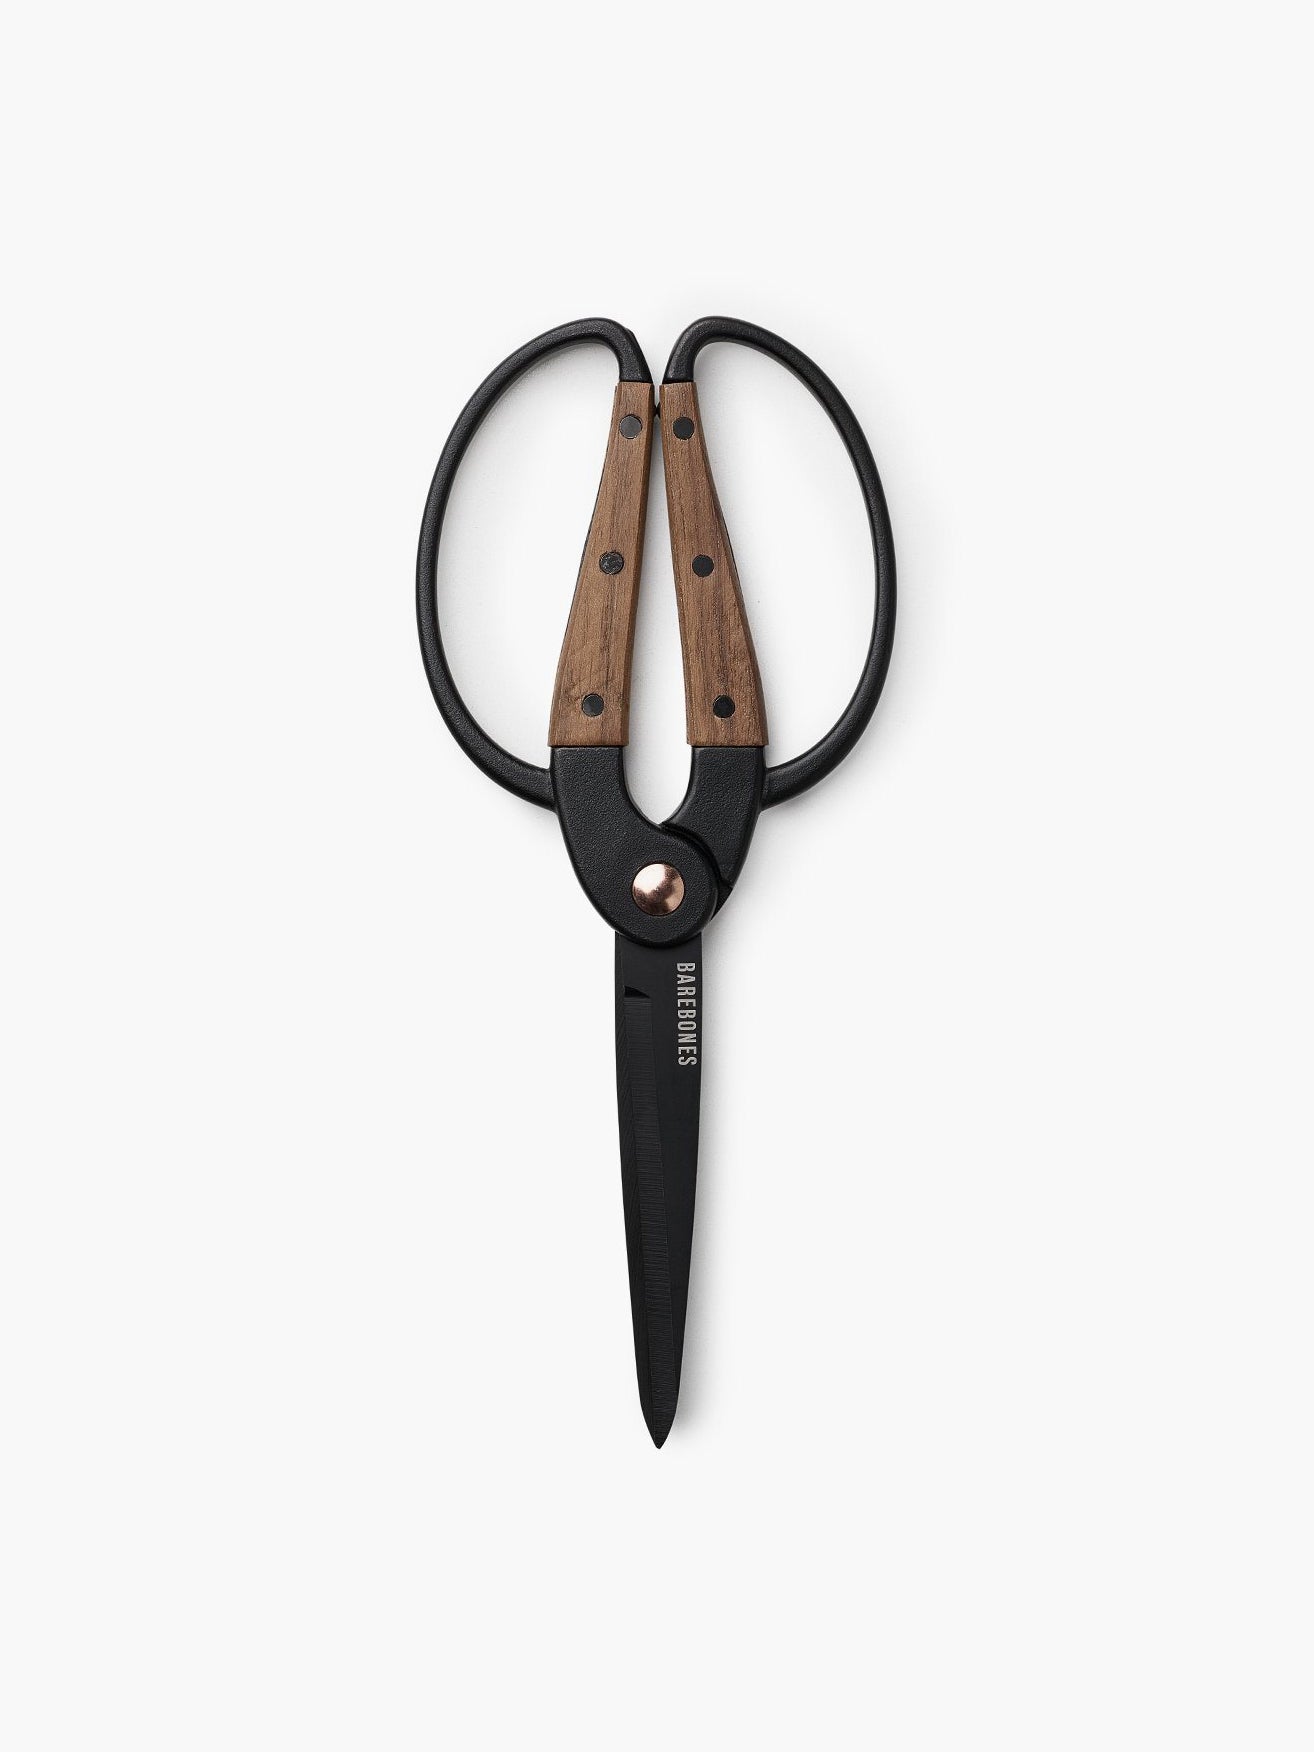 A pair of Walnut Garden Scissors – Large by Barebones, in black and brown, on a white surface.